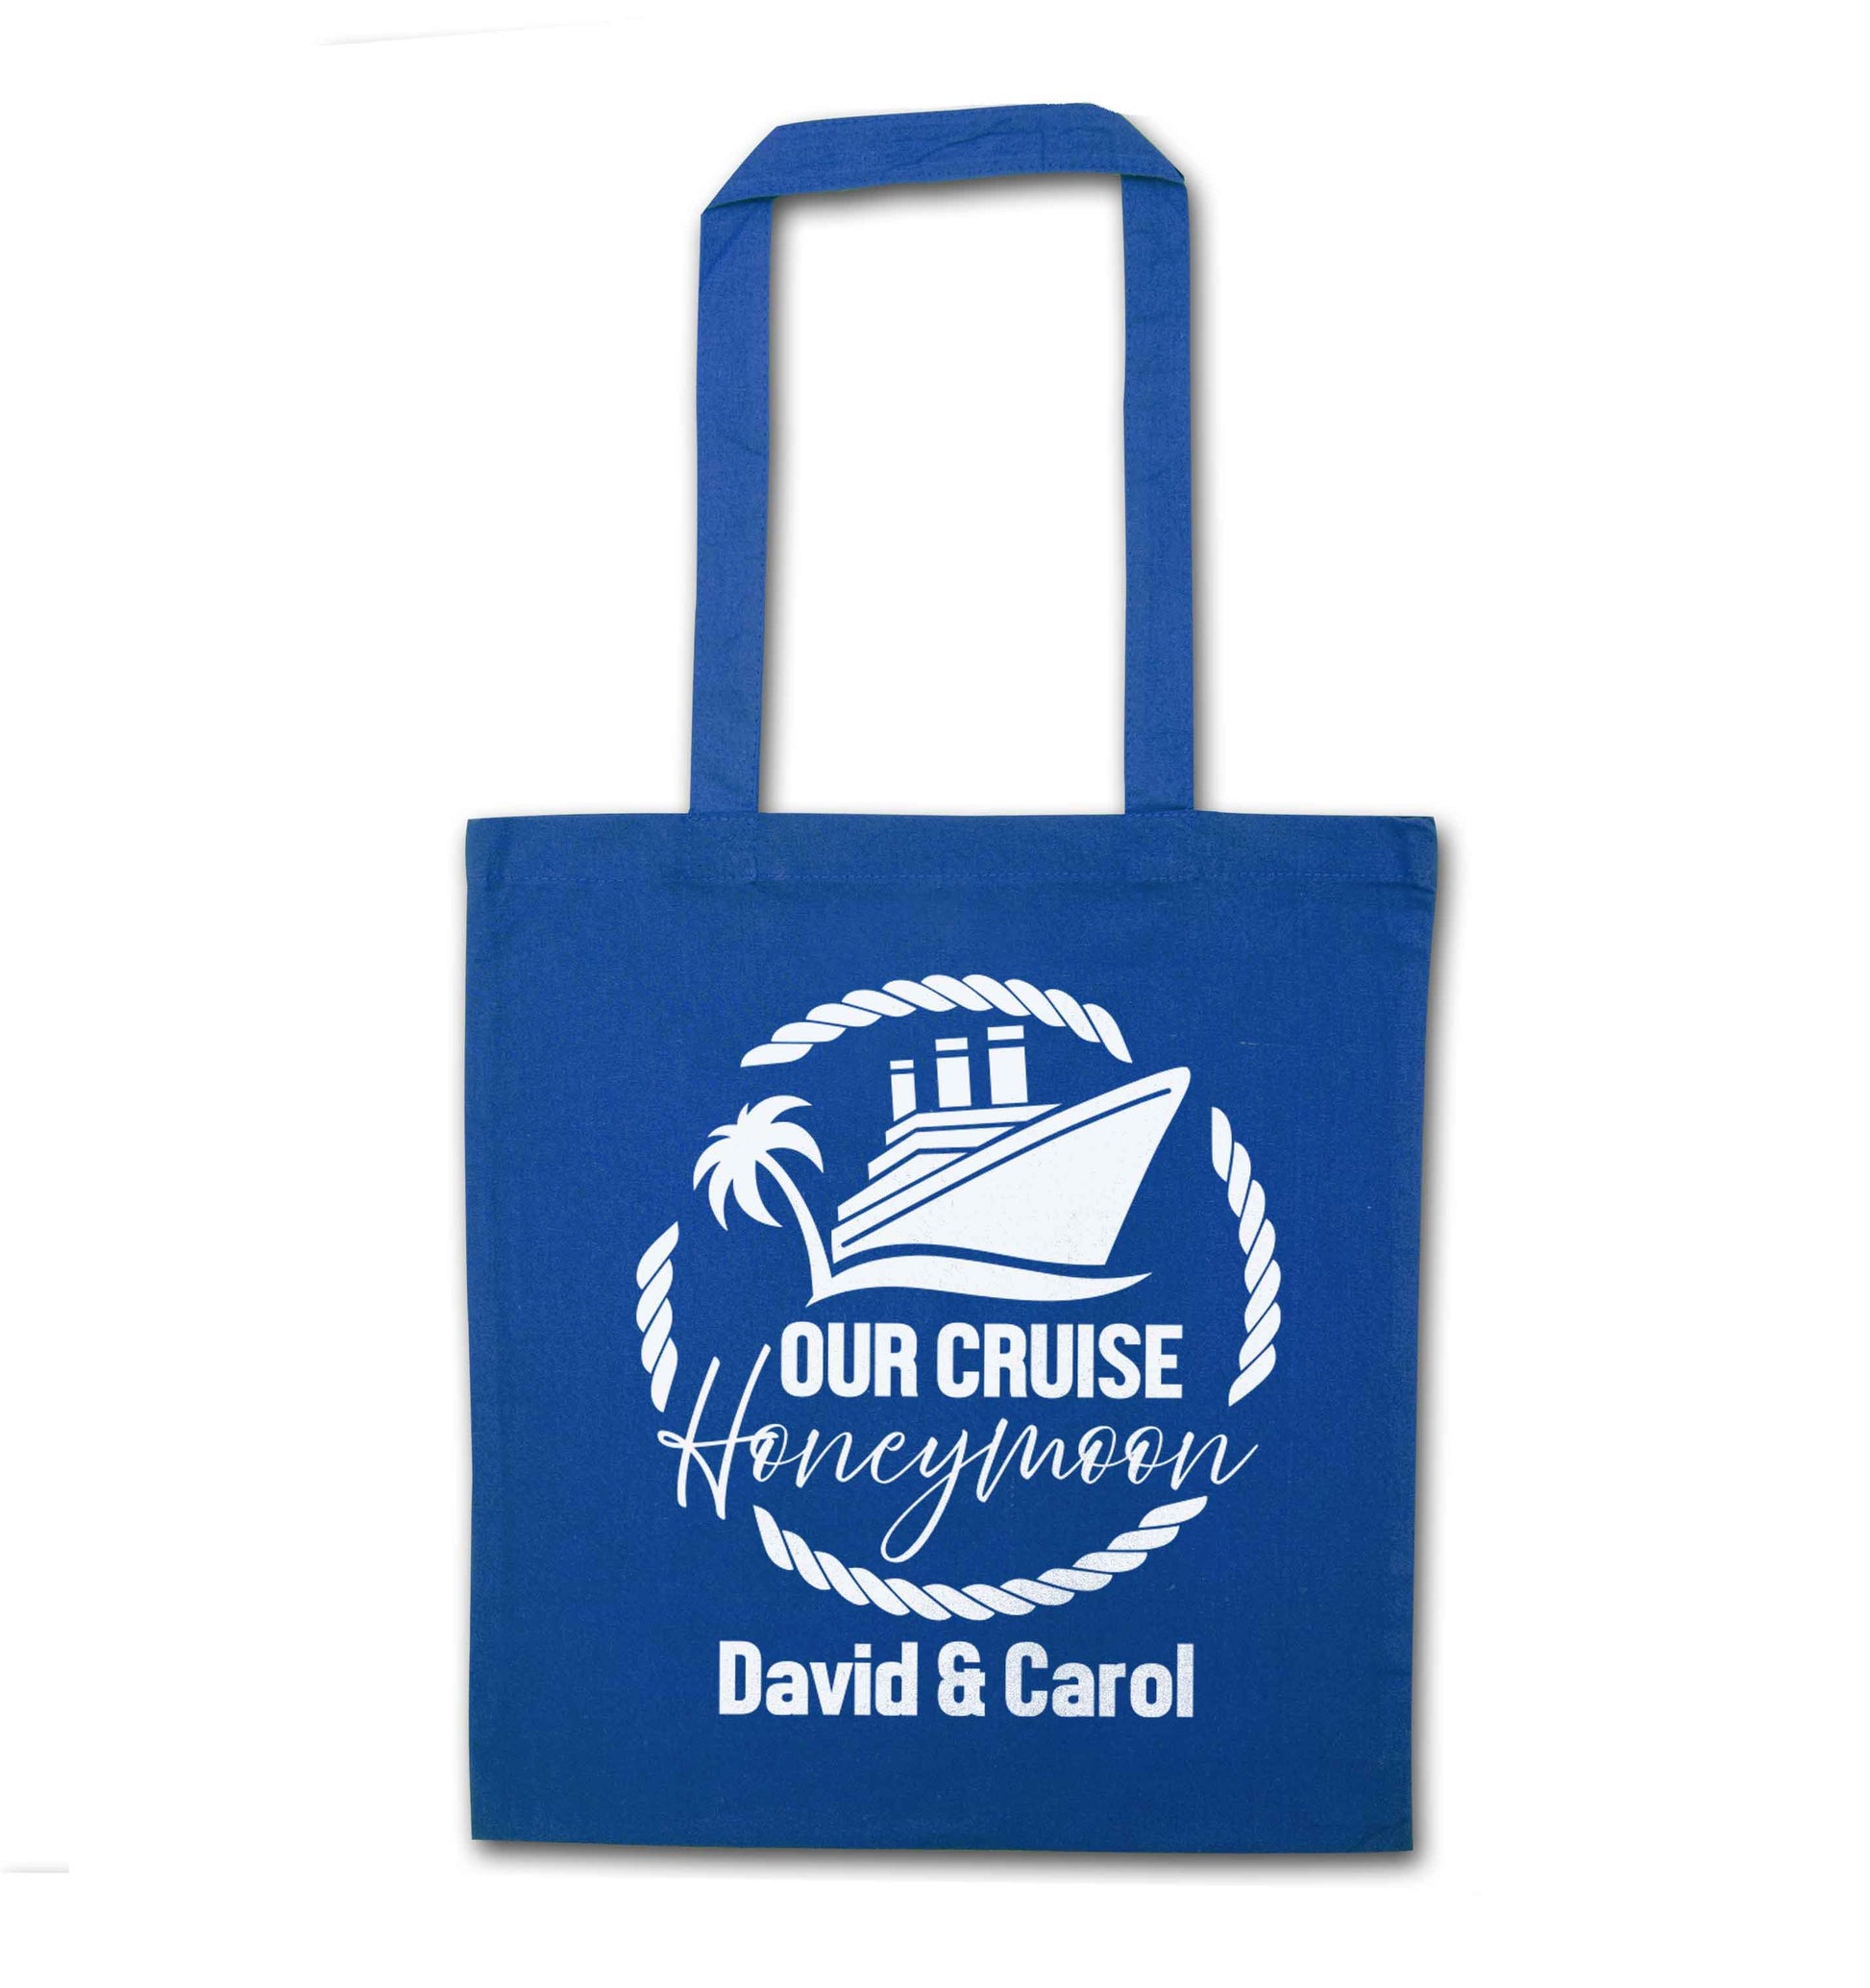 Our cruise honeymoon personalised blue tote bag